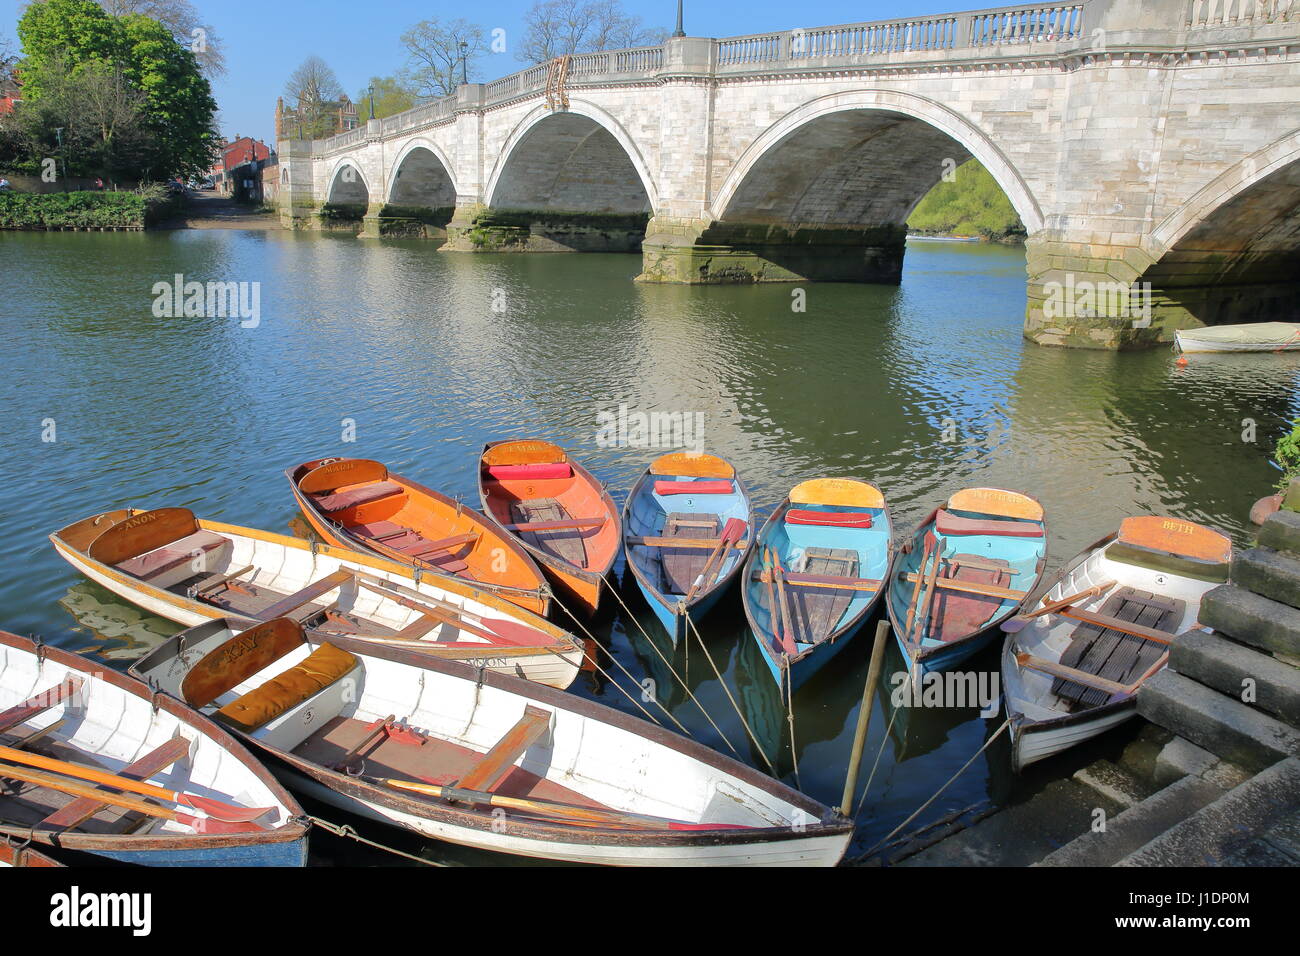 LONDON, UK - APRIL 9, 2017: Colorful boats on the river Thames in Richmond (Southwest London) with Richmond Bridge in the background Stock Photo